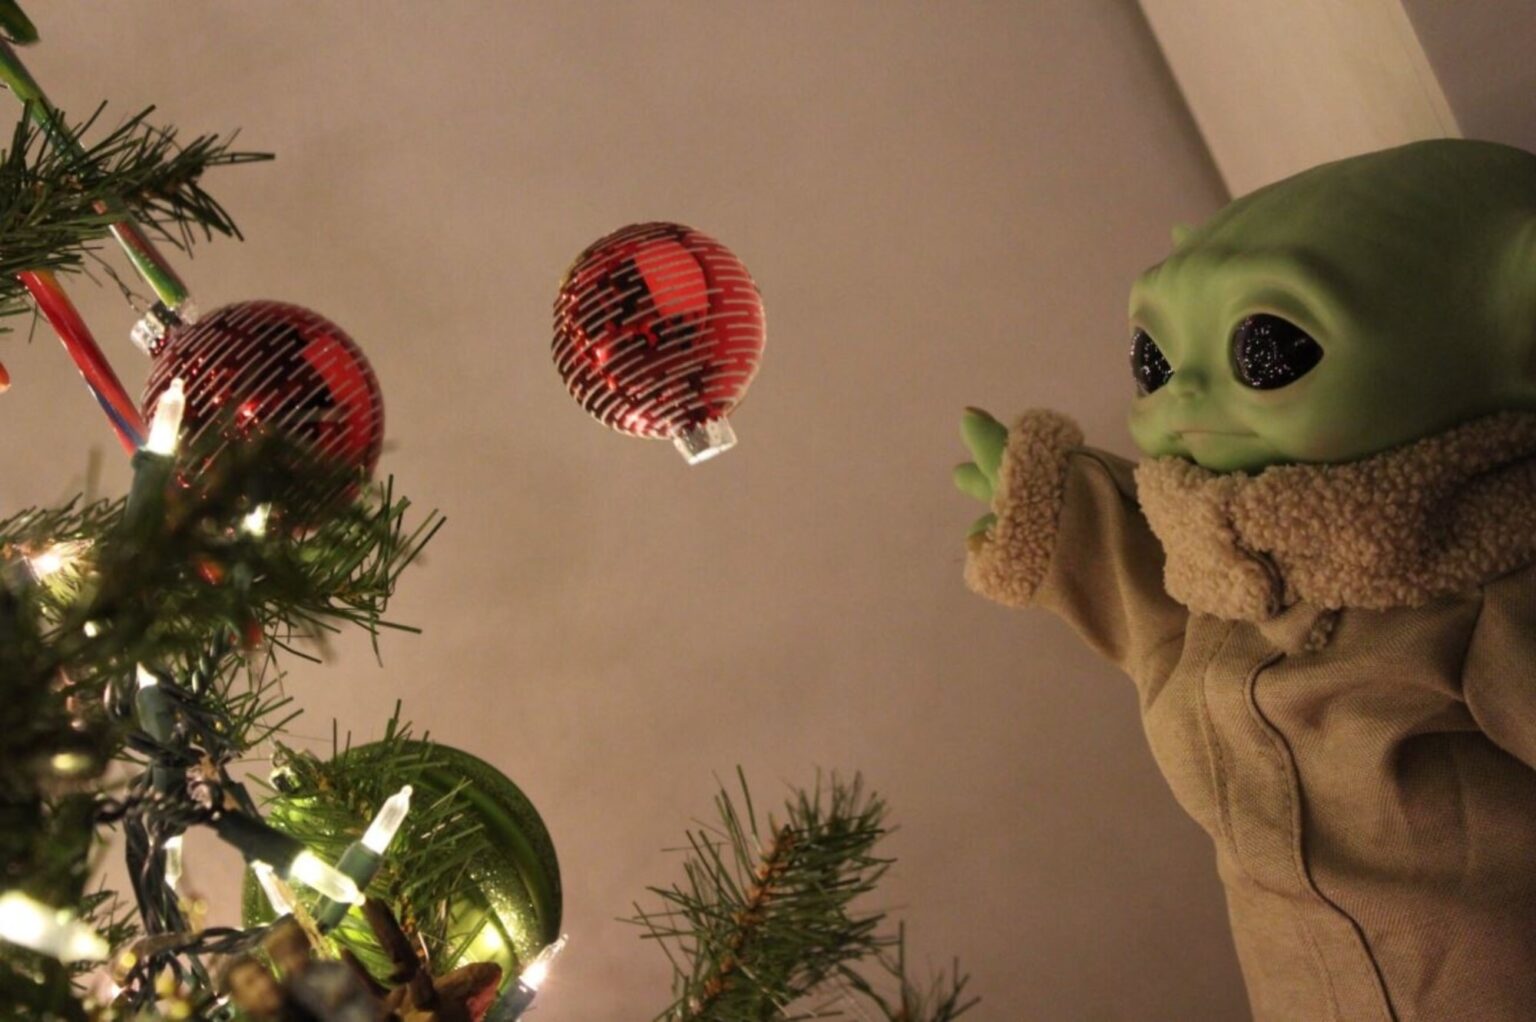 The smiling baby Yoda is the hottest Christmas tree topper in 2020. See how 'Star Wars' fans celebrate the holiday season with baby 'Grogu'.